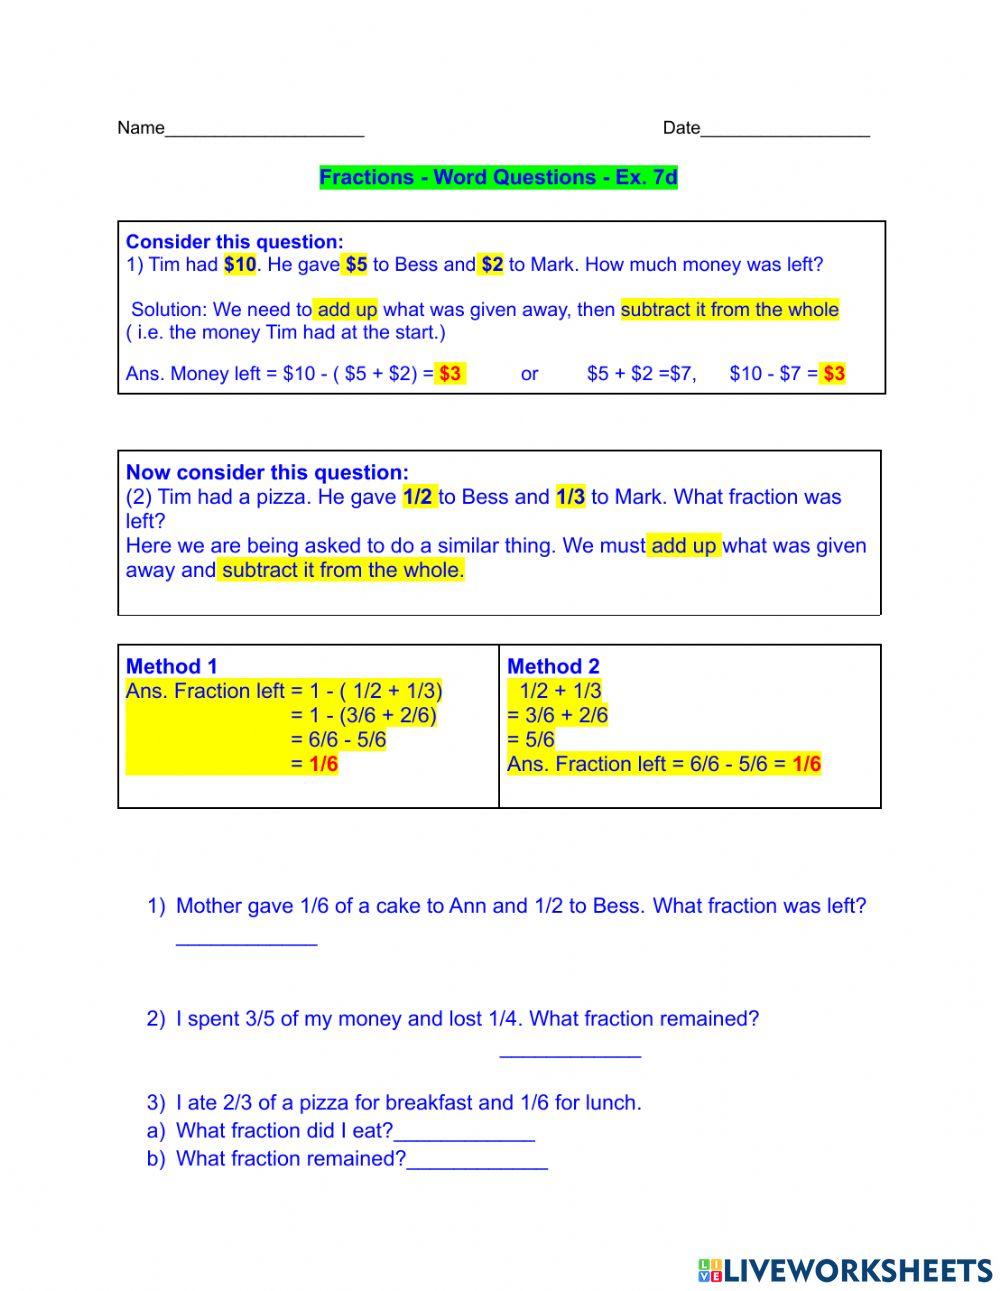 Fractions - Word Questions - Ex. 7d